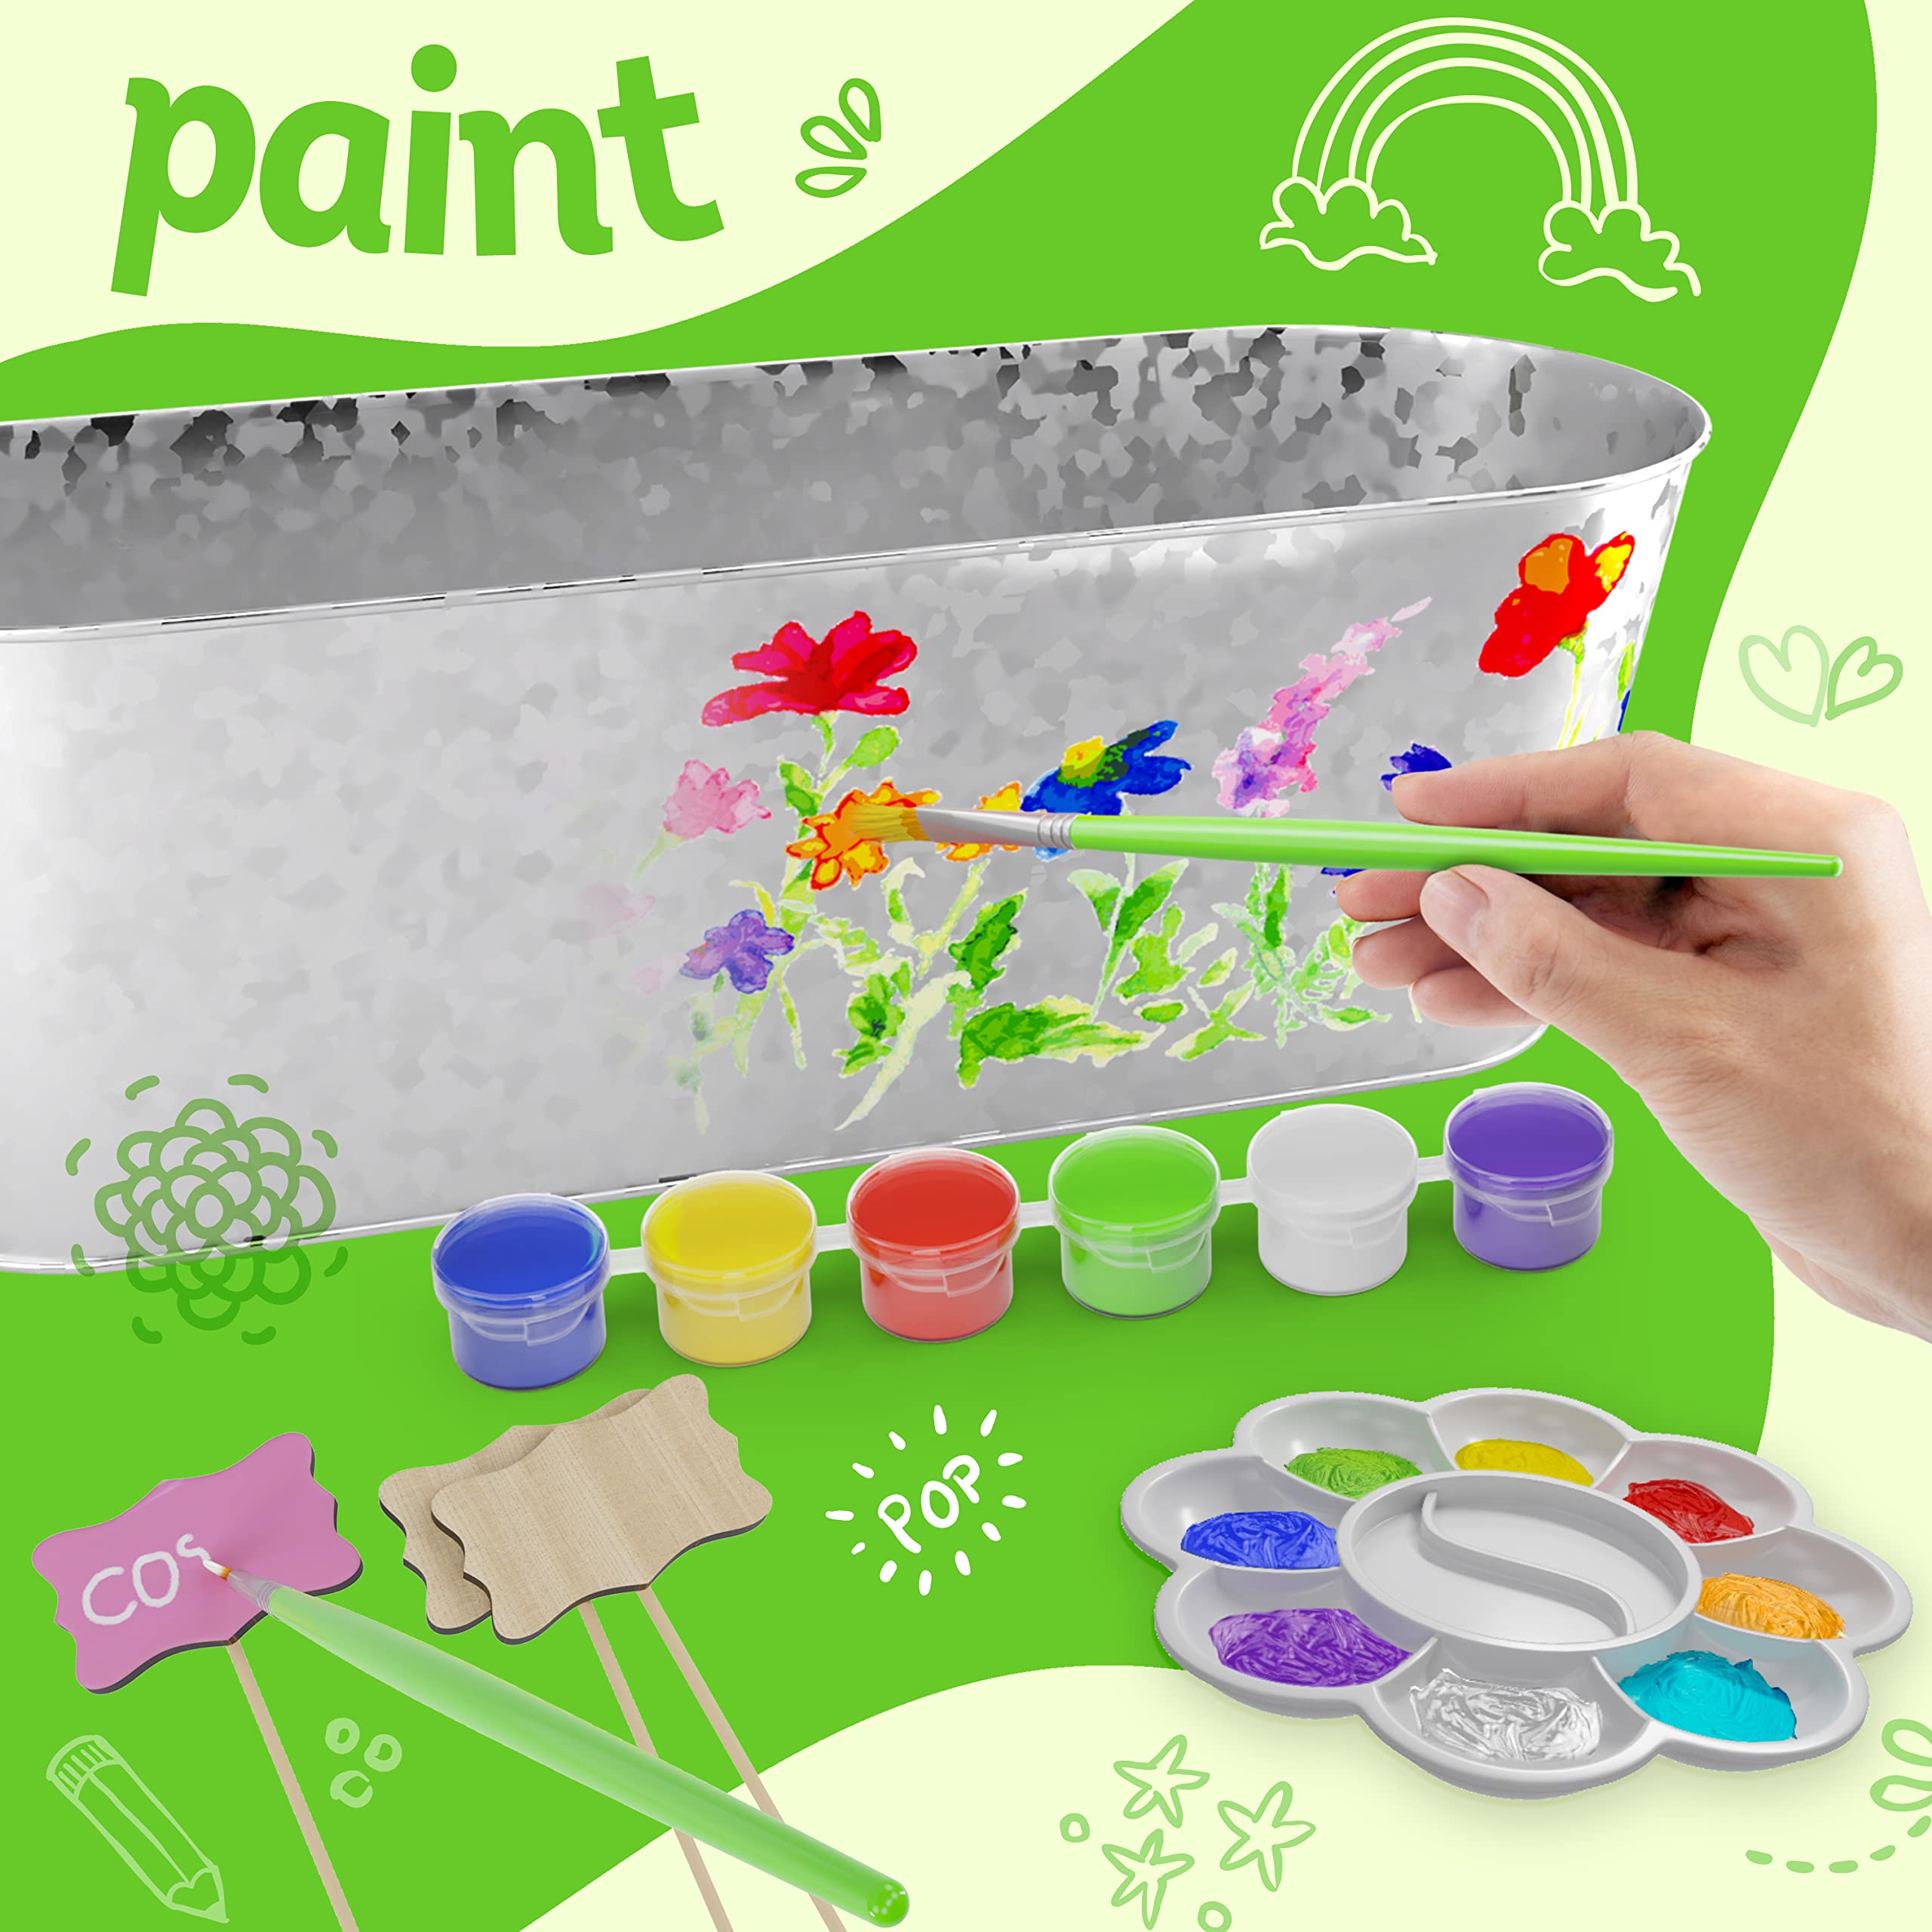 Dan&Darci Paint & Plant Flower Craft Kit for Kids - Best Birthday Crafts Gifts for Girls & Boys Age 5 6 7 8-12 Year Old Girl Gift - Children Gardening Kits, Art Projects Toys for Ages 5-12 Years